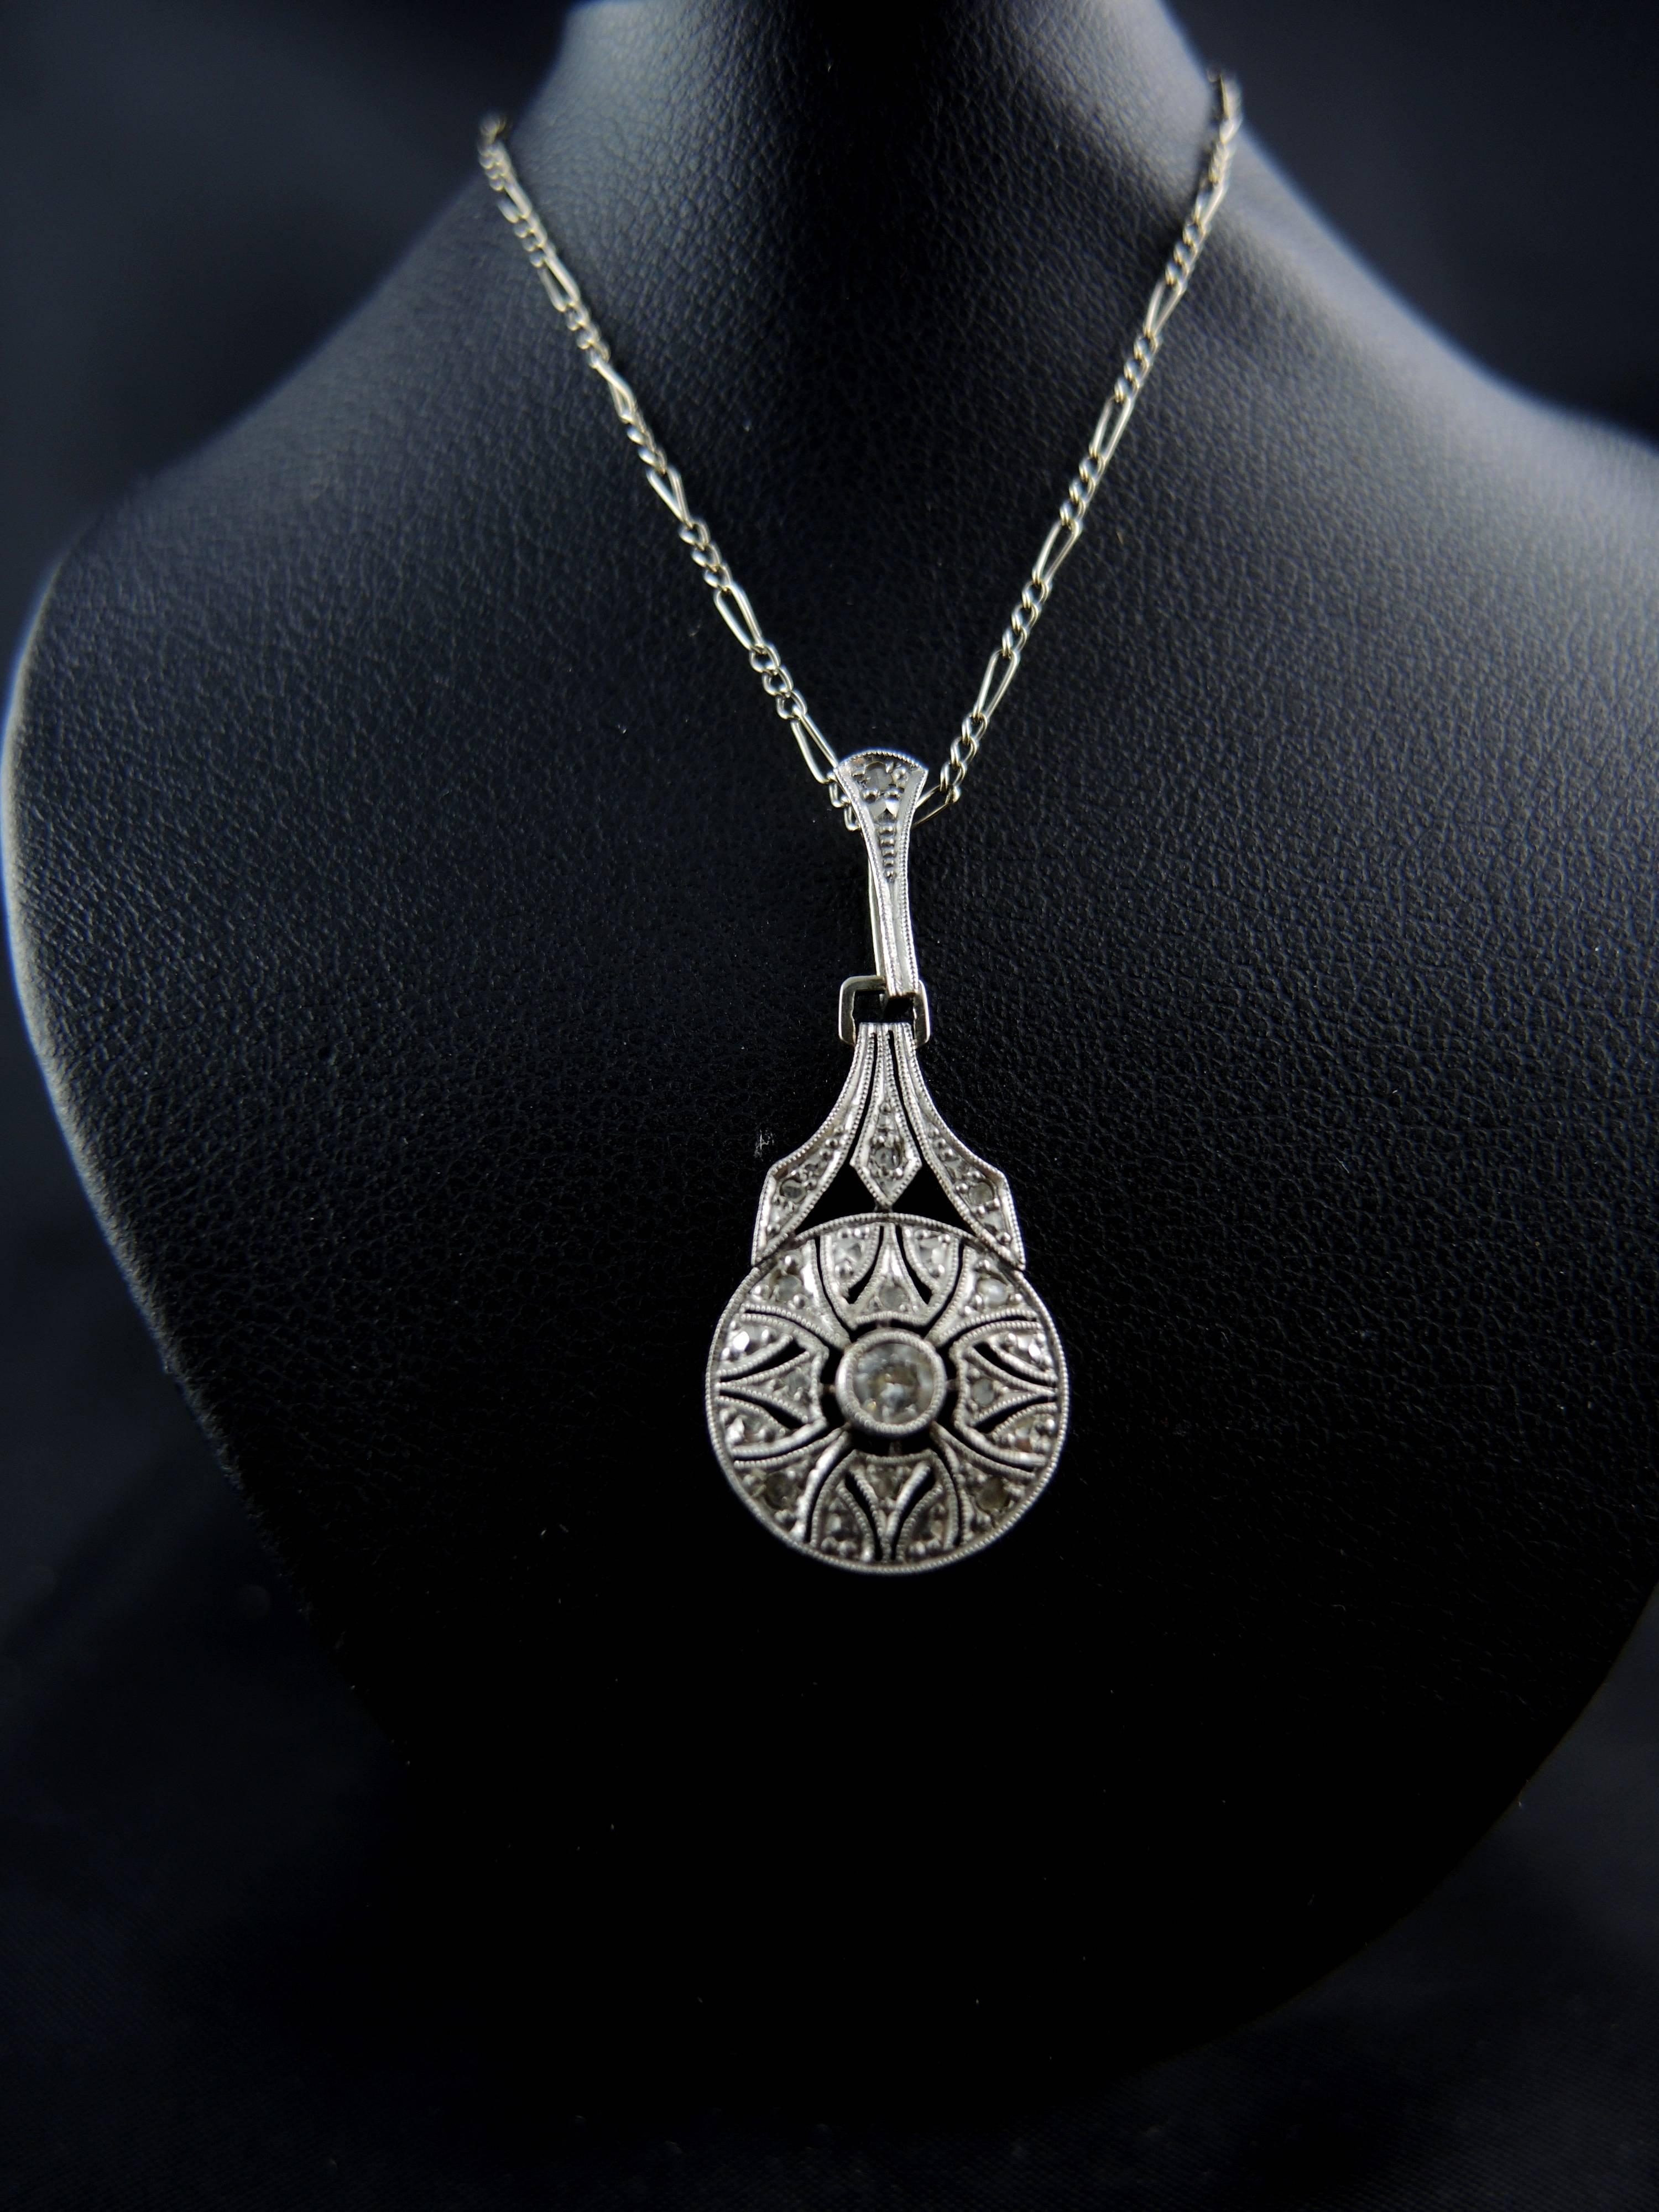 Antique 18kt white gold necklace (quality mark: head of eagle and owl) set with old and rose cut diamonds, which total weight is estimated around 0,25 ct.
 
Circa 1930, Art Deco.

Weight: 2,90 g
Chain's lenght: 42,00 cm
Pendant's high: 3,00